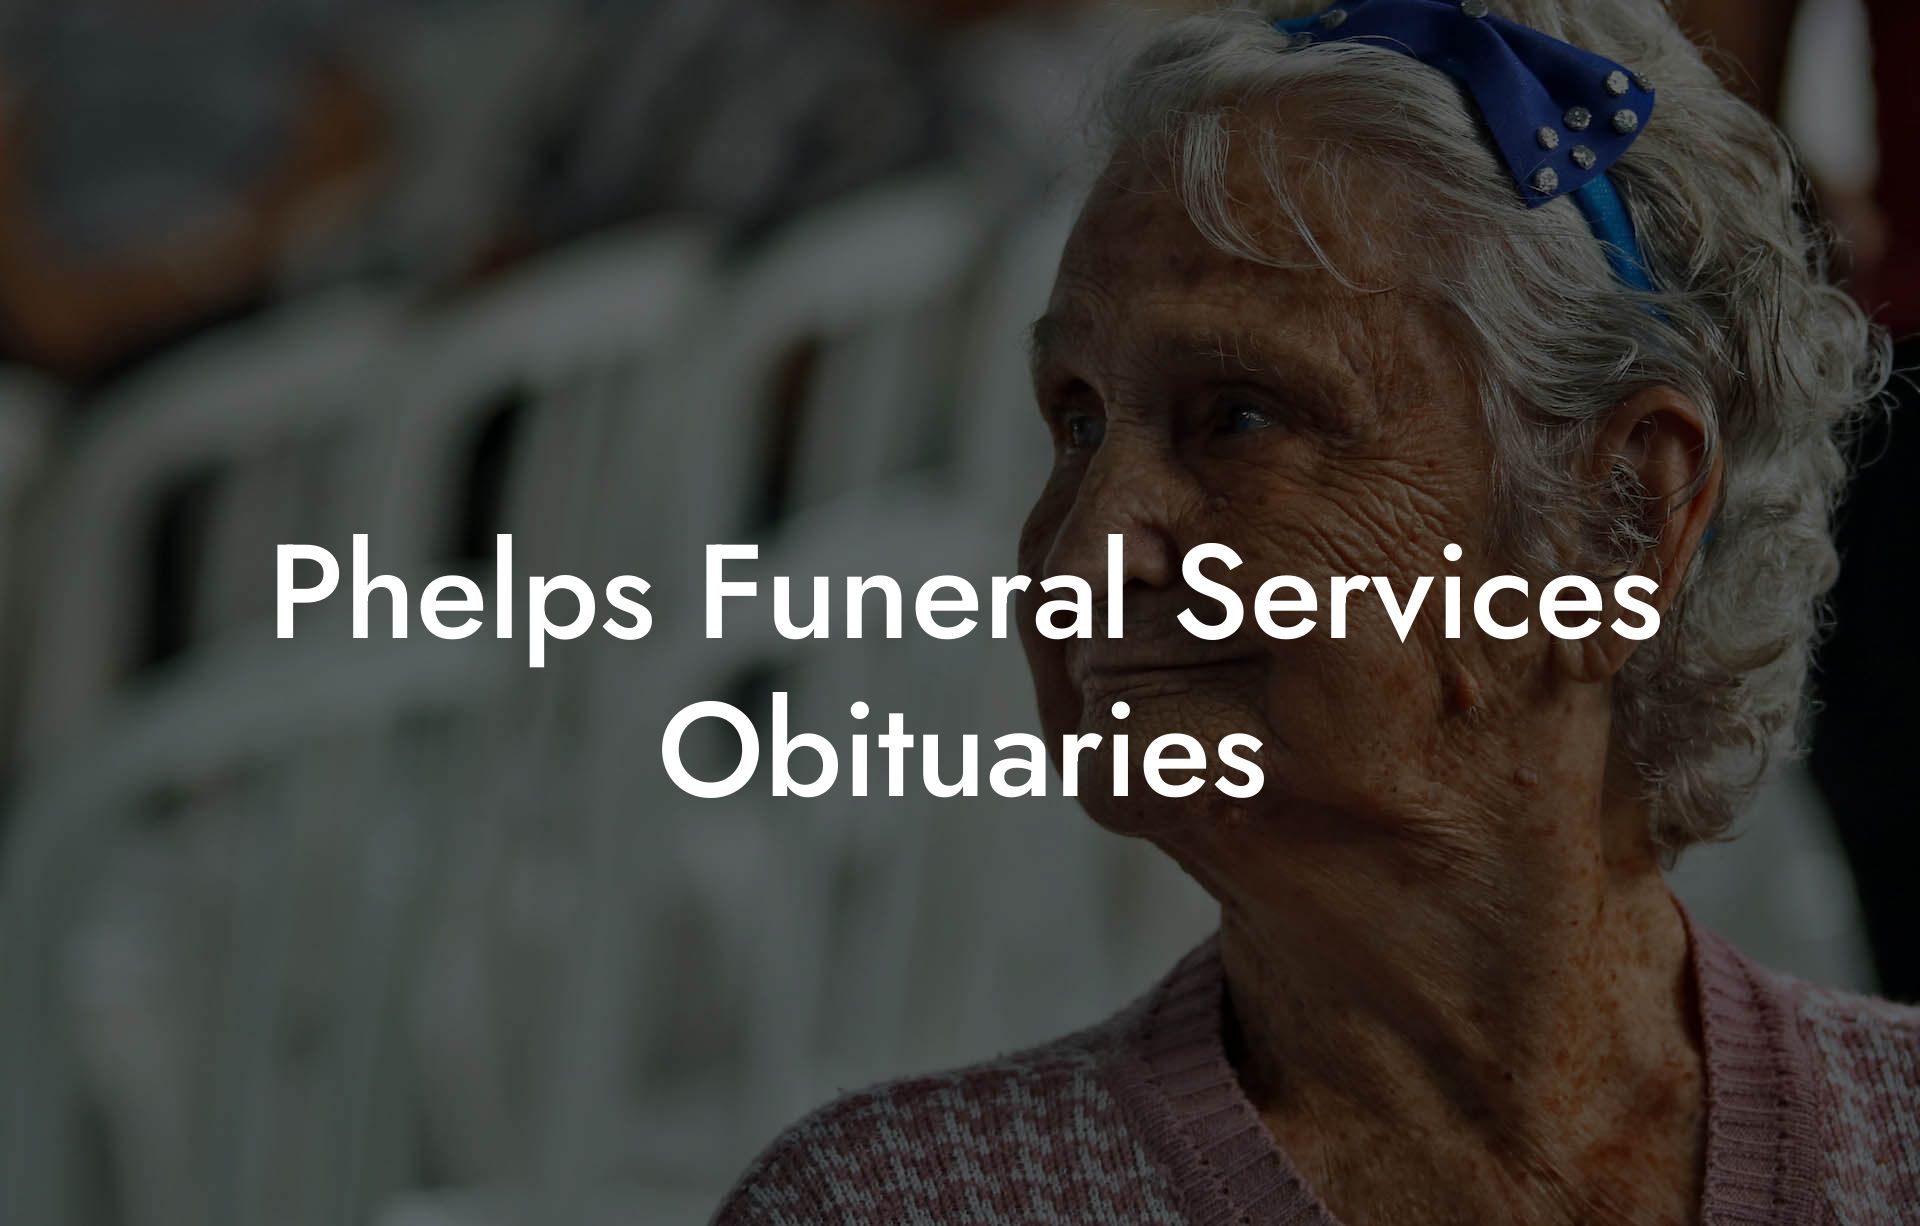 Phelps Funeral Services Obituaries